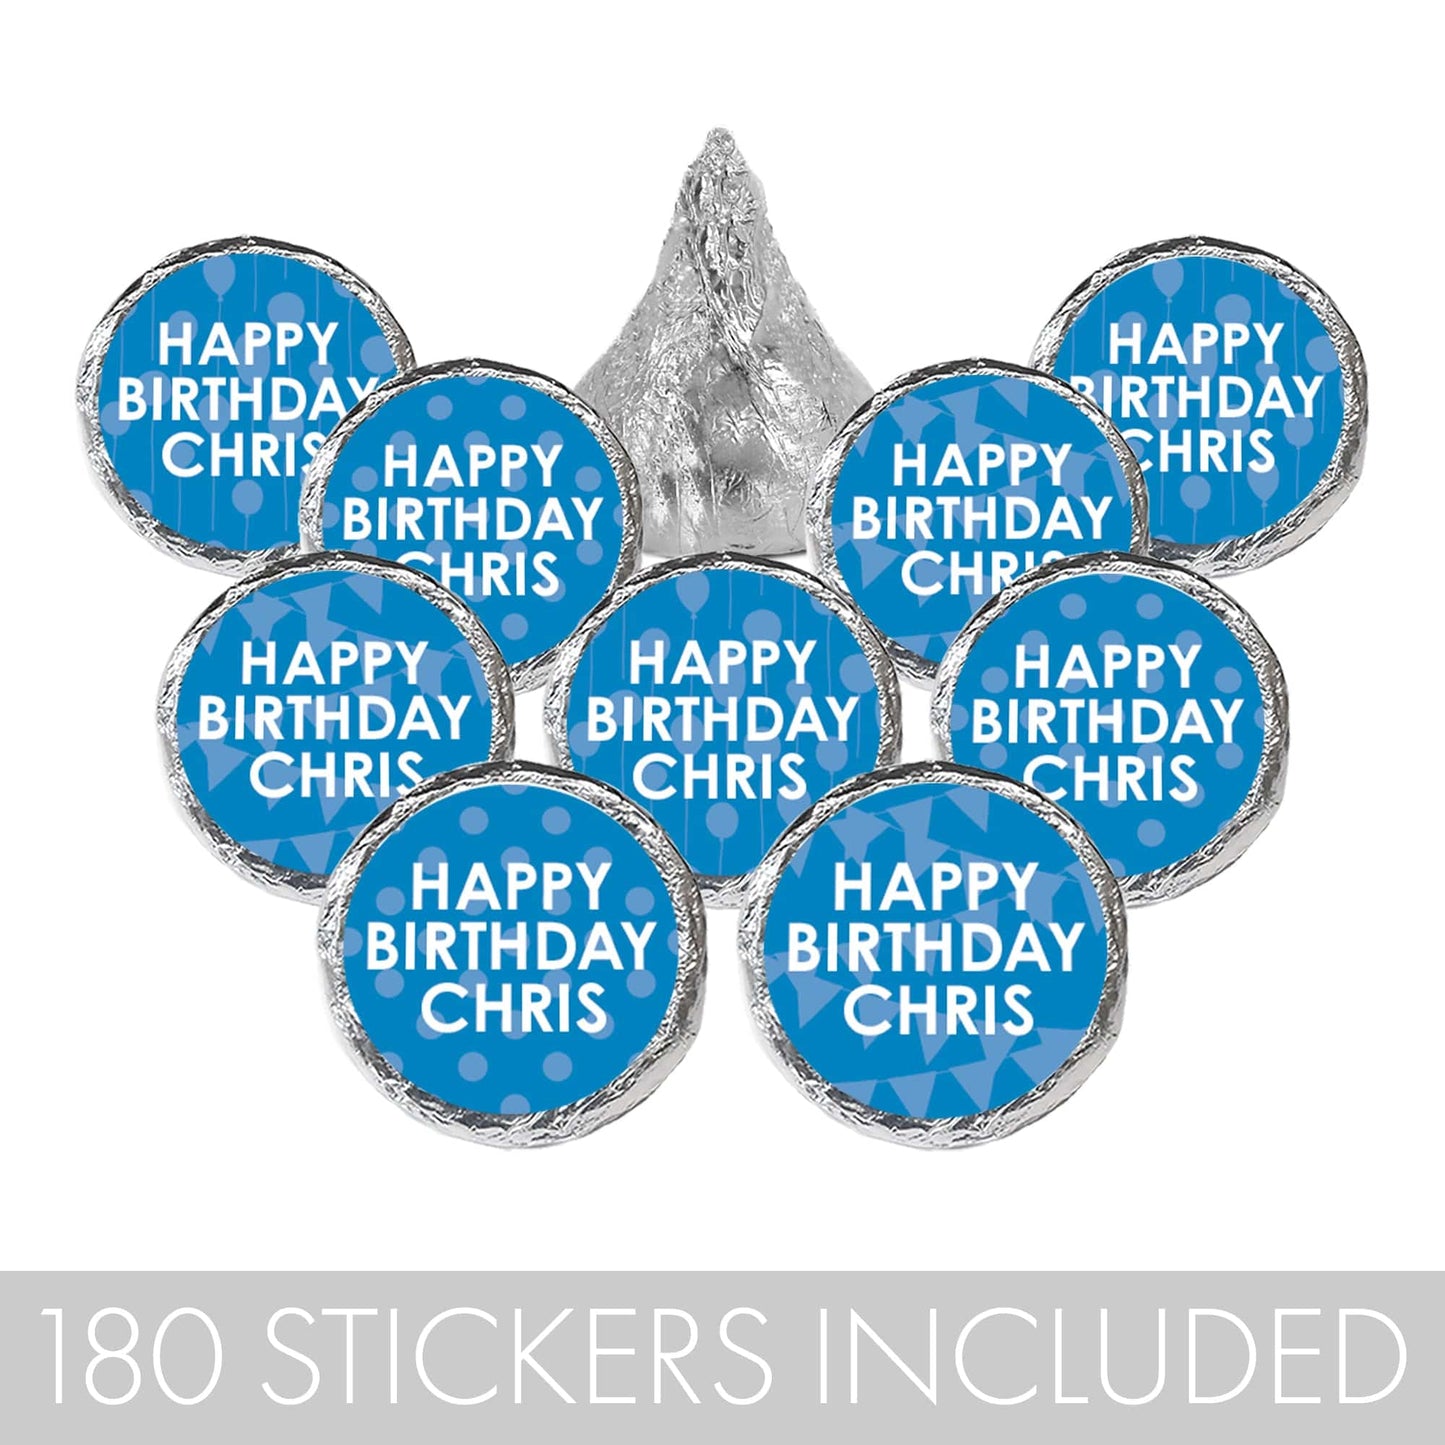 Personalized Happy Birthday Party Favor Stickers With Name - 180 Stickers